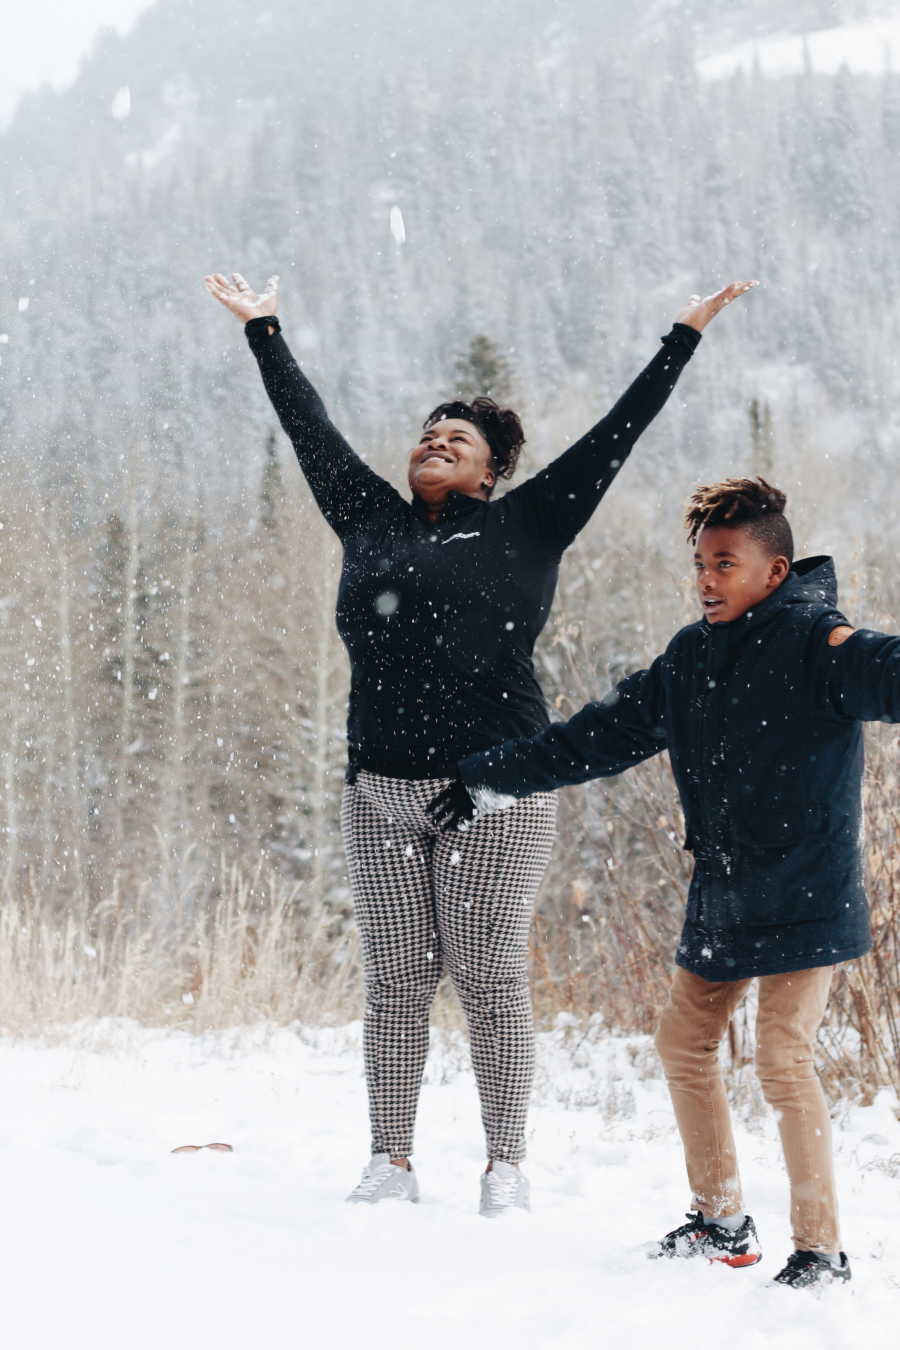 Mother who gave her son up for adoption stands with him outside as she holds her hands in air while snow falls